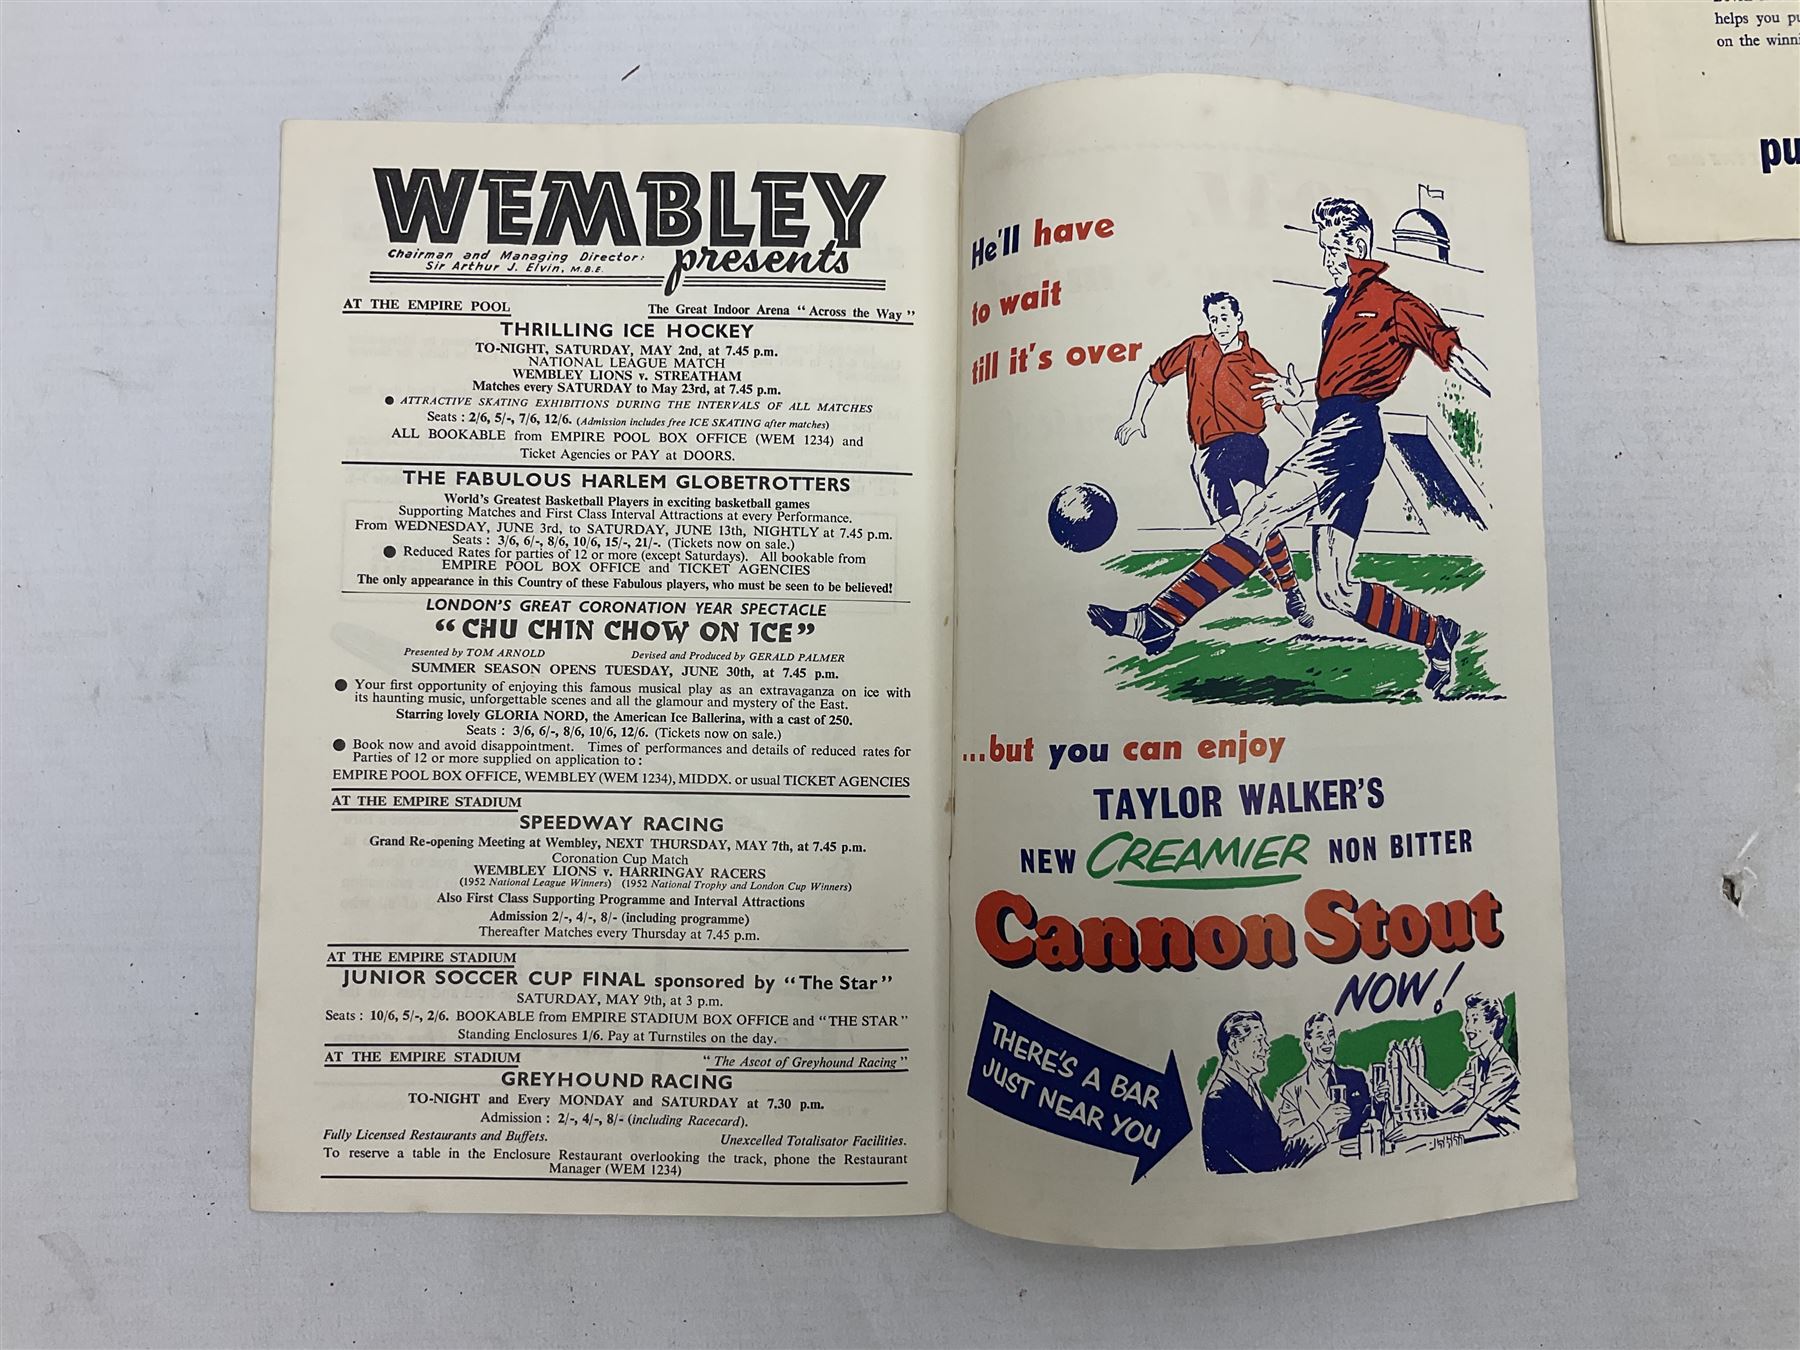 Three F.A. Cup Final programmes at Wembley - 1952 Arsenal v Newcastle United played on May 3rd; 1953 - Image 5 of 11